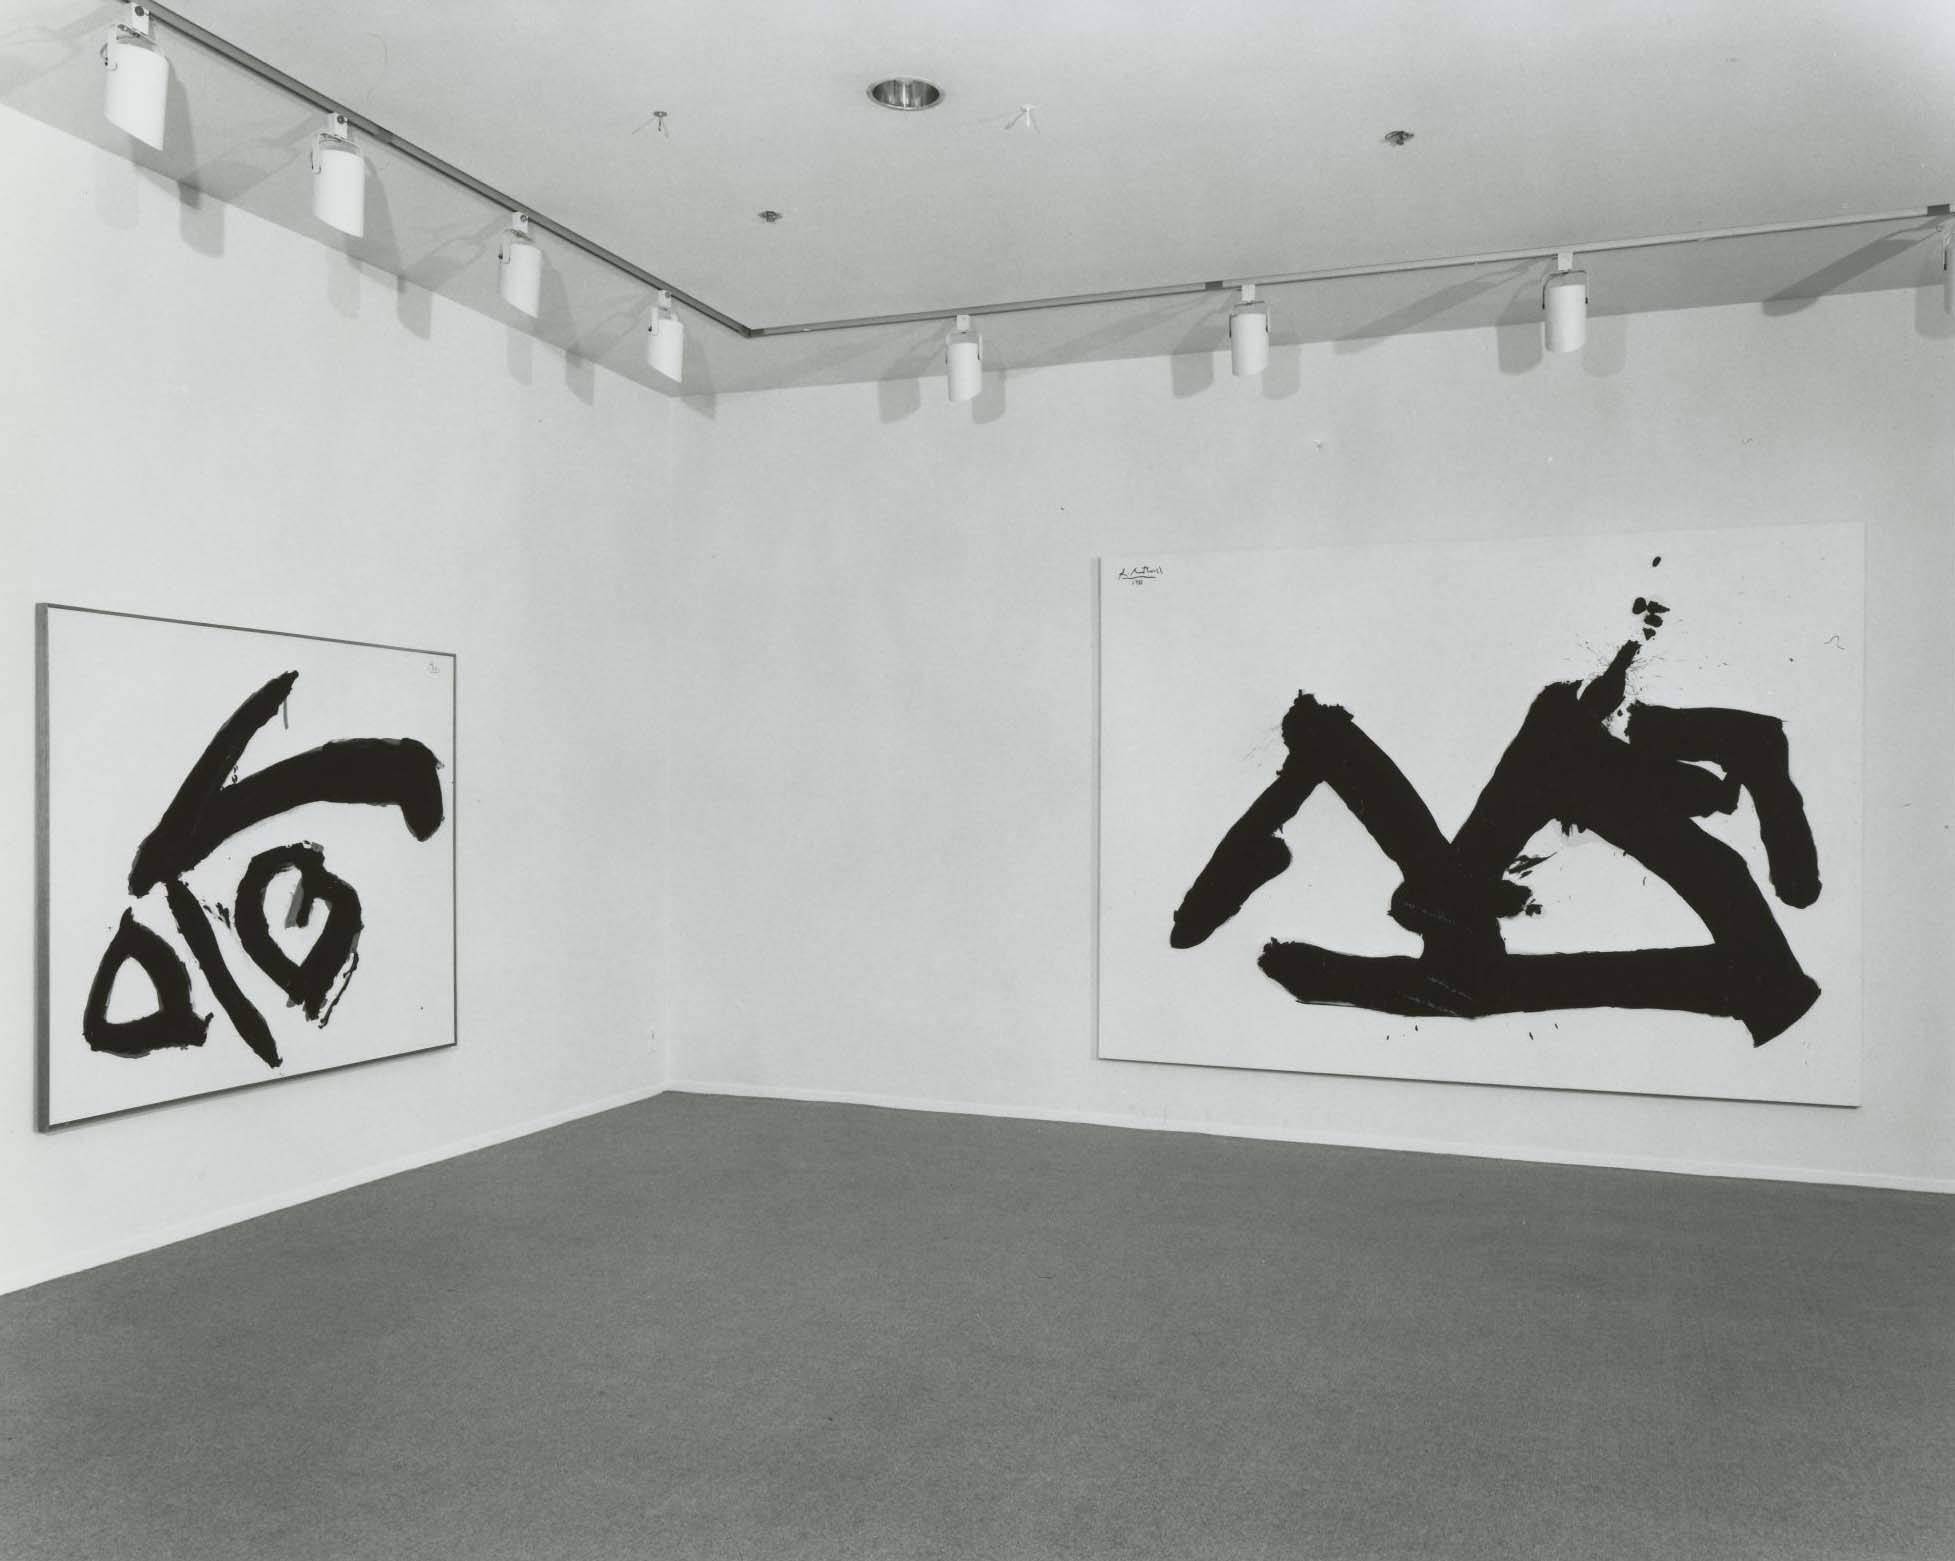 Installation view of Robert Motherwell: A Selection from Current Work at Knoedler & Company, February 1982. From left to right: Bloom in Dublin and Stephen’s Iron Crown